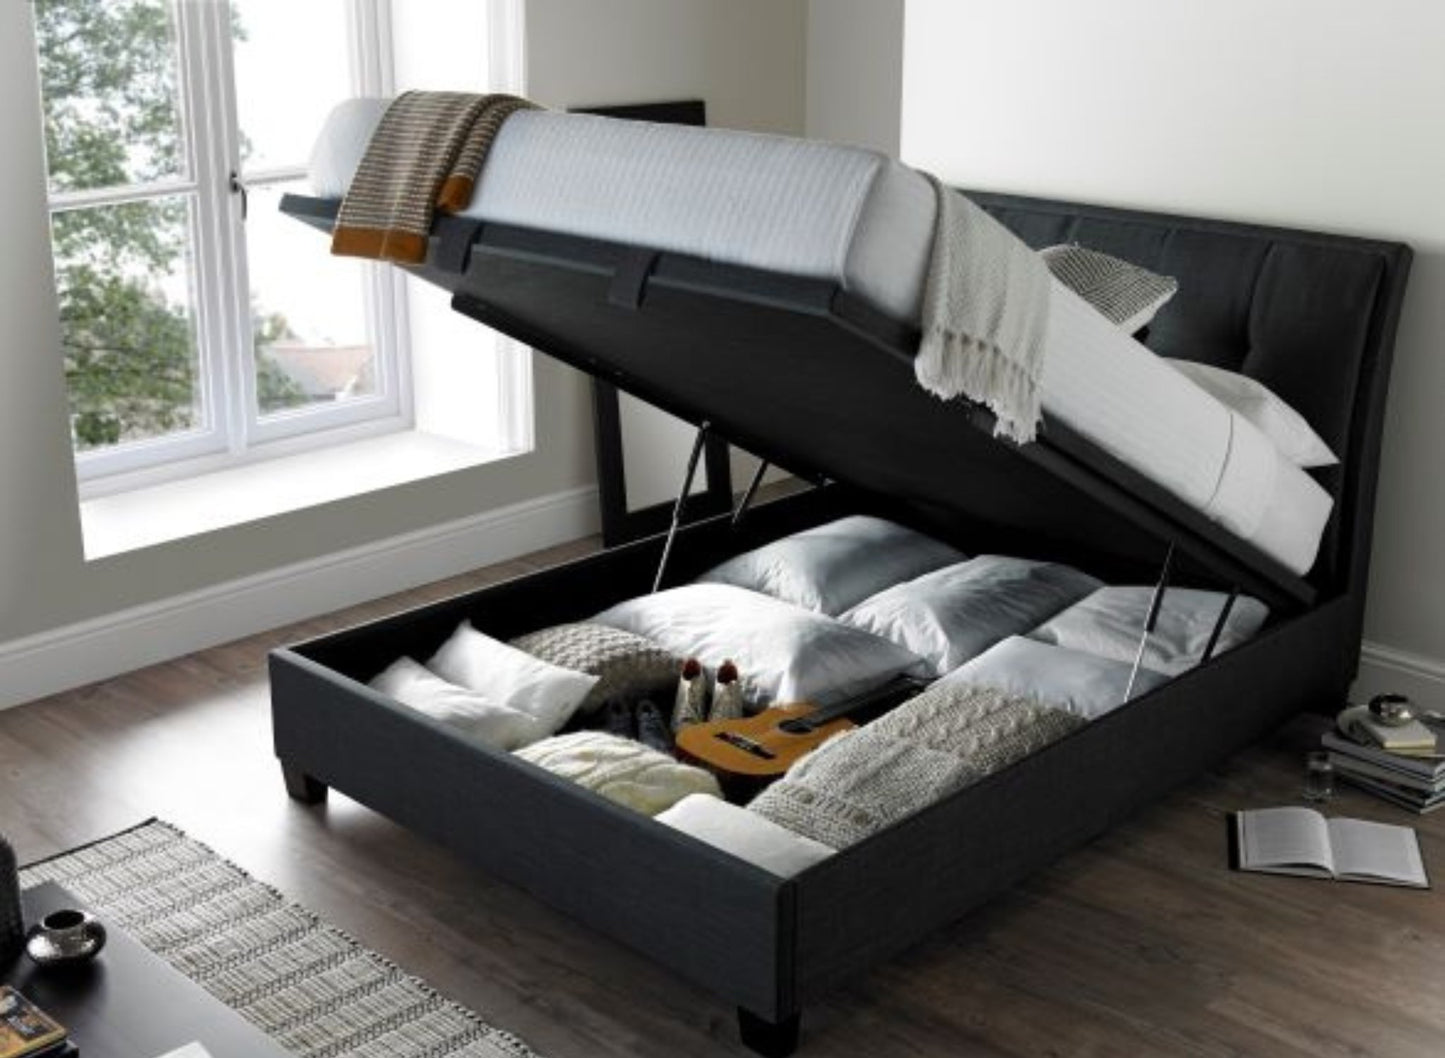 Accent Ottoman Storage Bed Frame by Kaydian Design LTD in ACC135MDG only at TV Beds Northwest